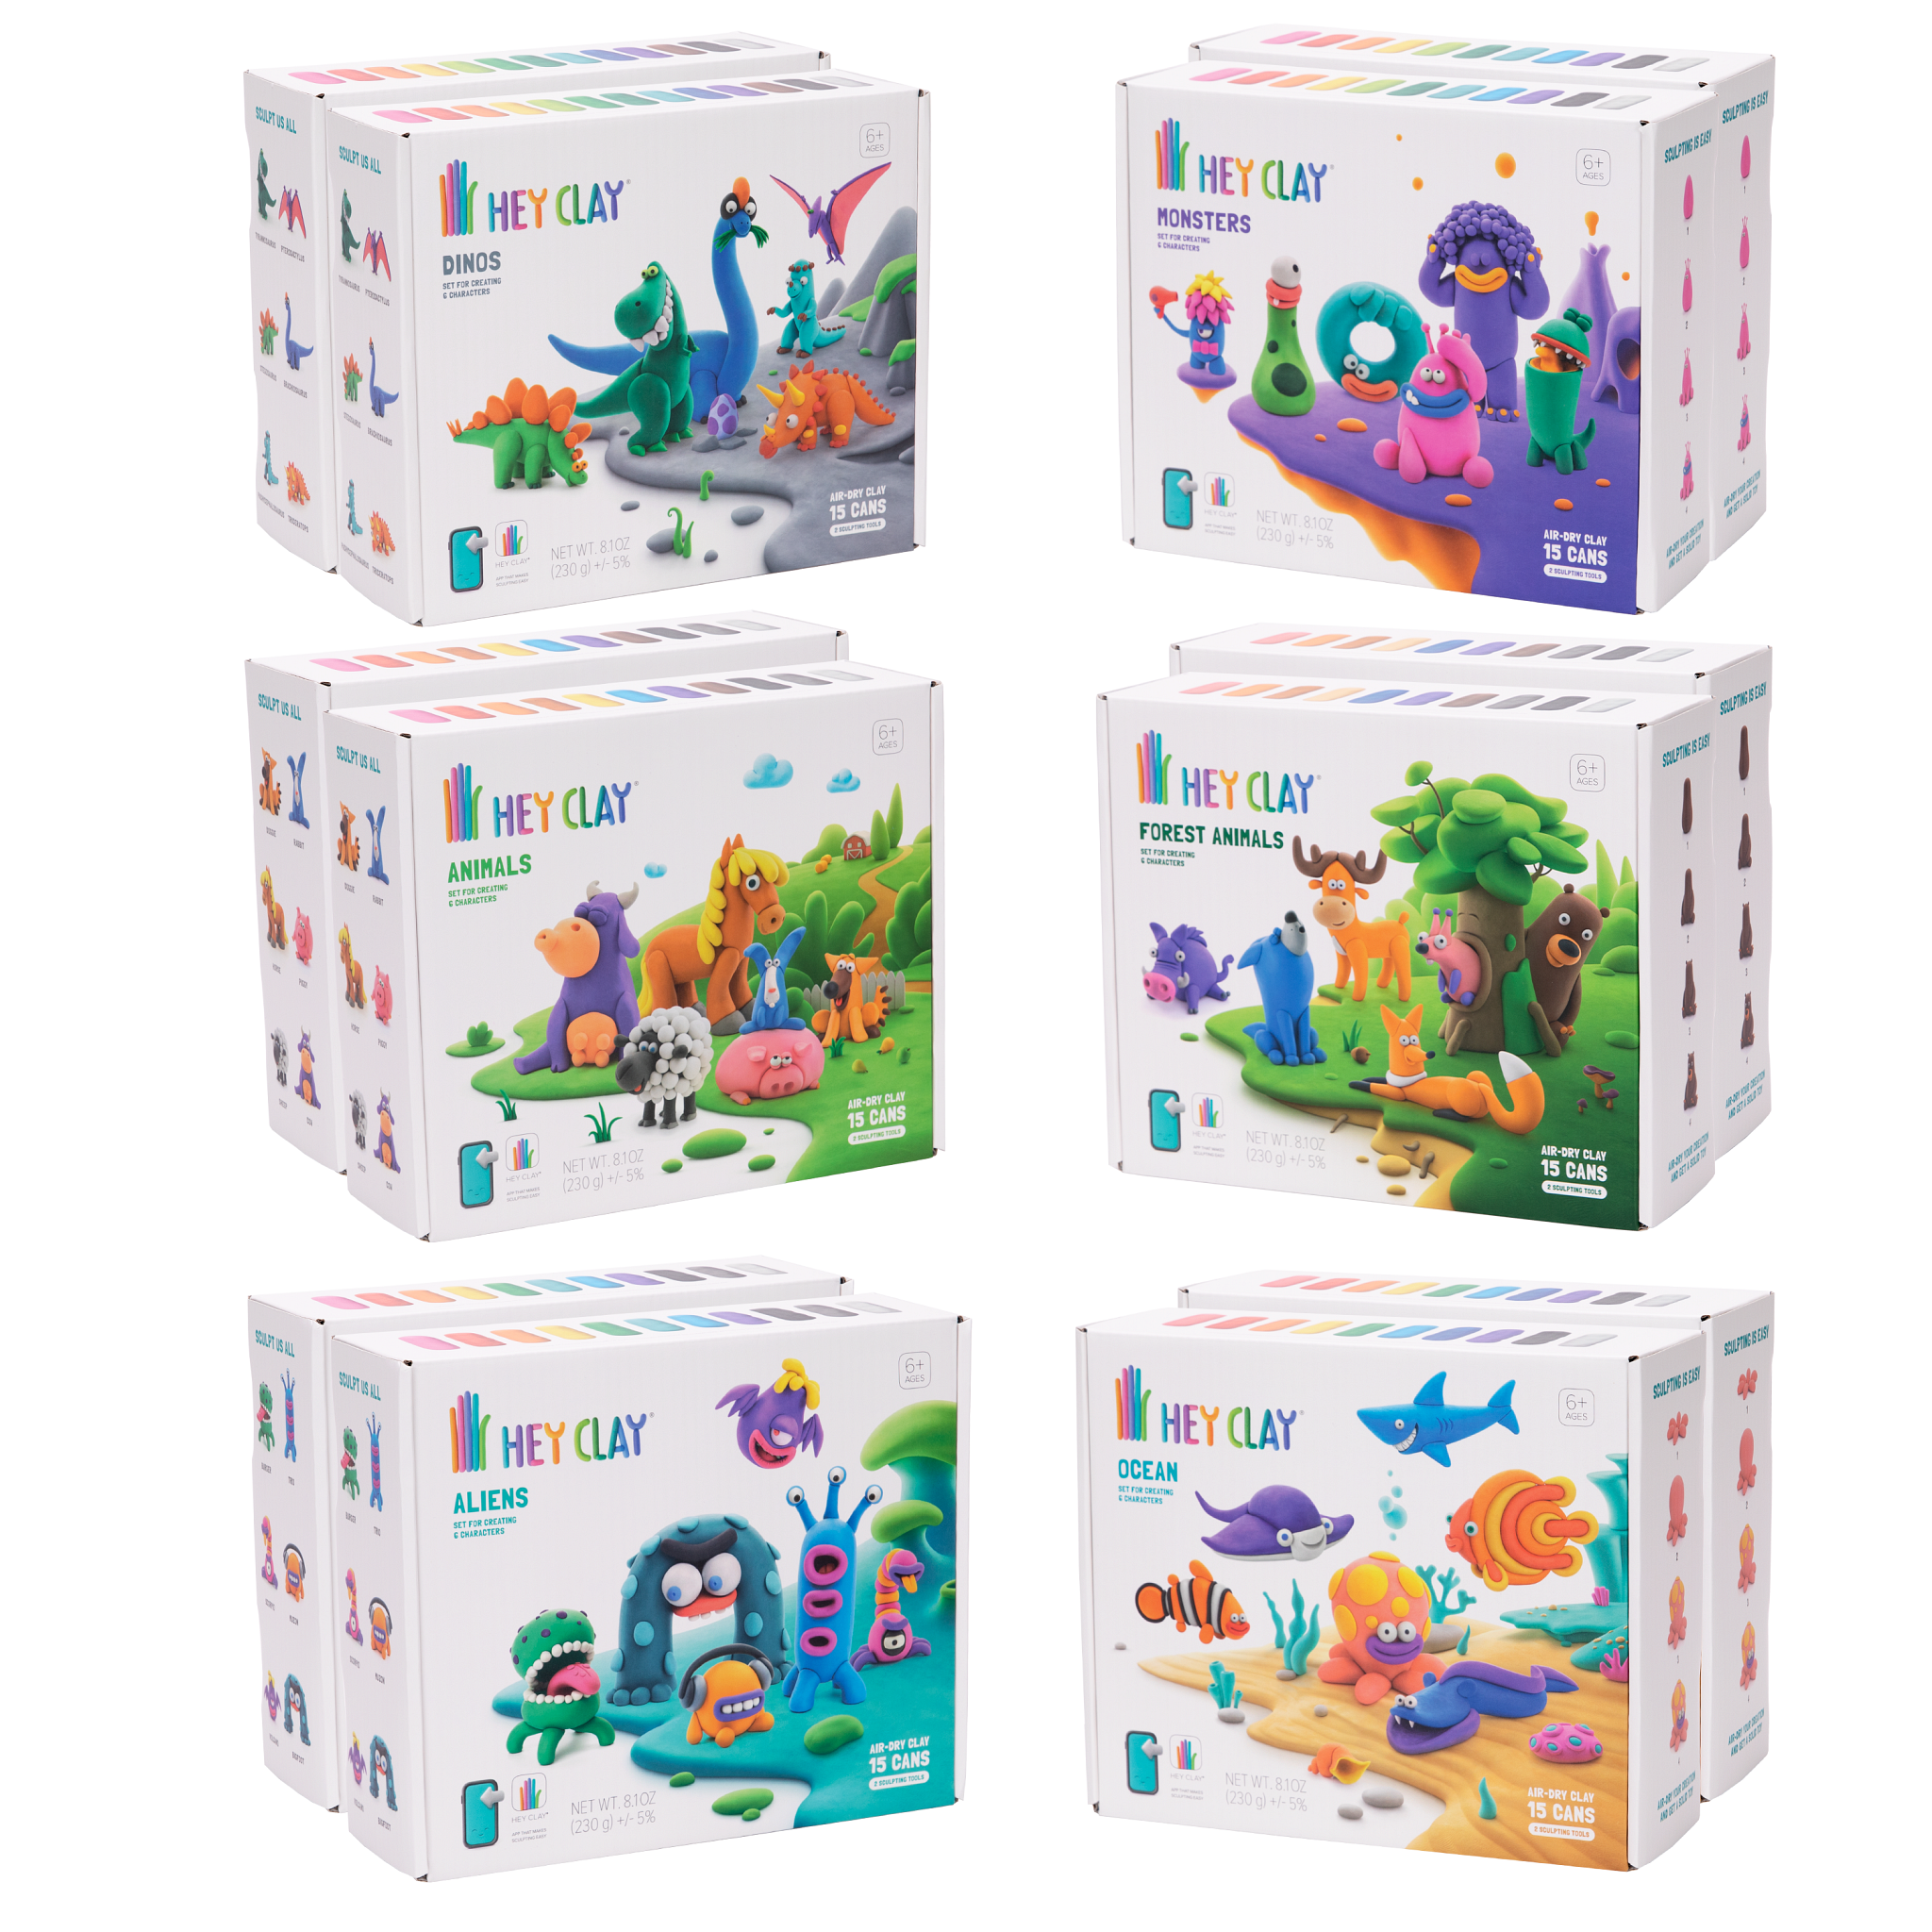 Hey Clay Sets – Child's Play